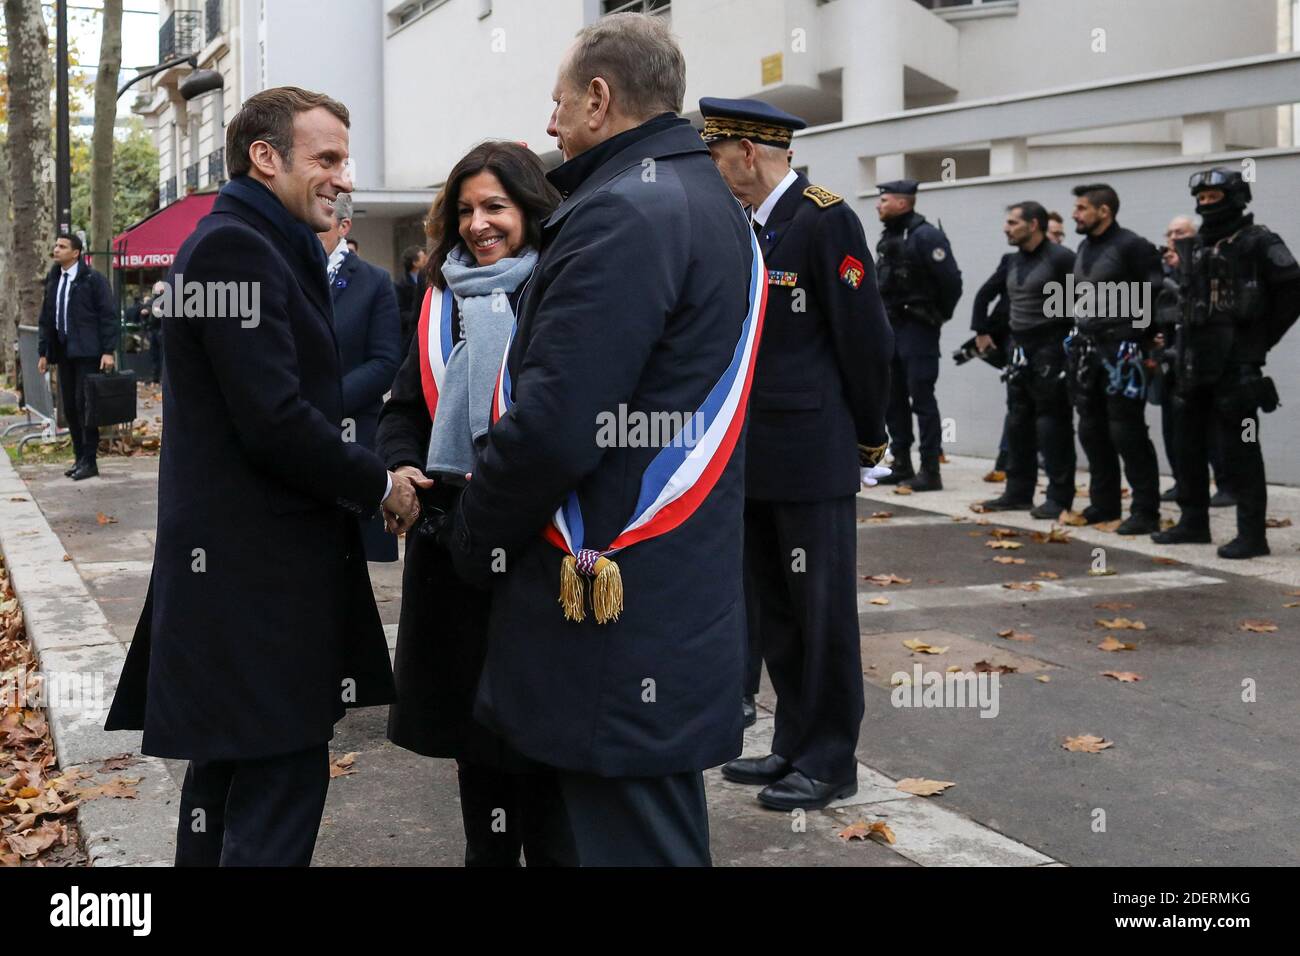 French President Emmanuel Macron, Paris' mayor Anne Hidalgo and Mayor of the 15th arrondissement Philippe Goujon at official inauguration of the 'Monument aux morts pour la France en operations exterieures' (OPEX) by French artist Stephane Vigny on November 11, 2019 in the Eugenie-Djendi garden in Paris, France, as part of commemorations marking the 101st anniversary of the 11 November 1918 armistice, ending World War I. Photo by Stephane Lemouton/Pool/ABACAPRESS.COM Stock Photo